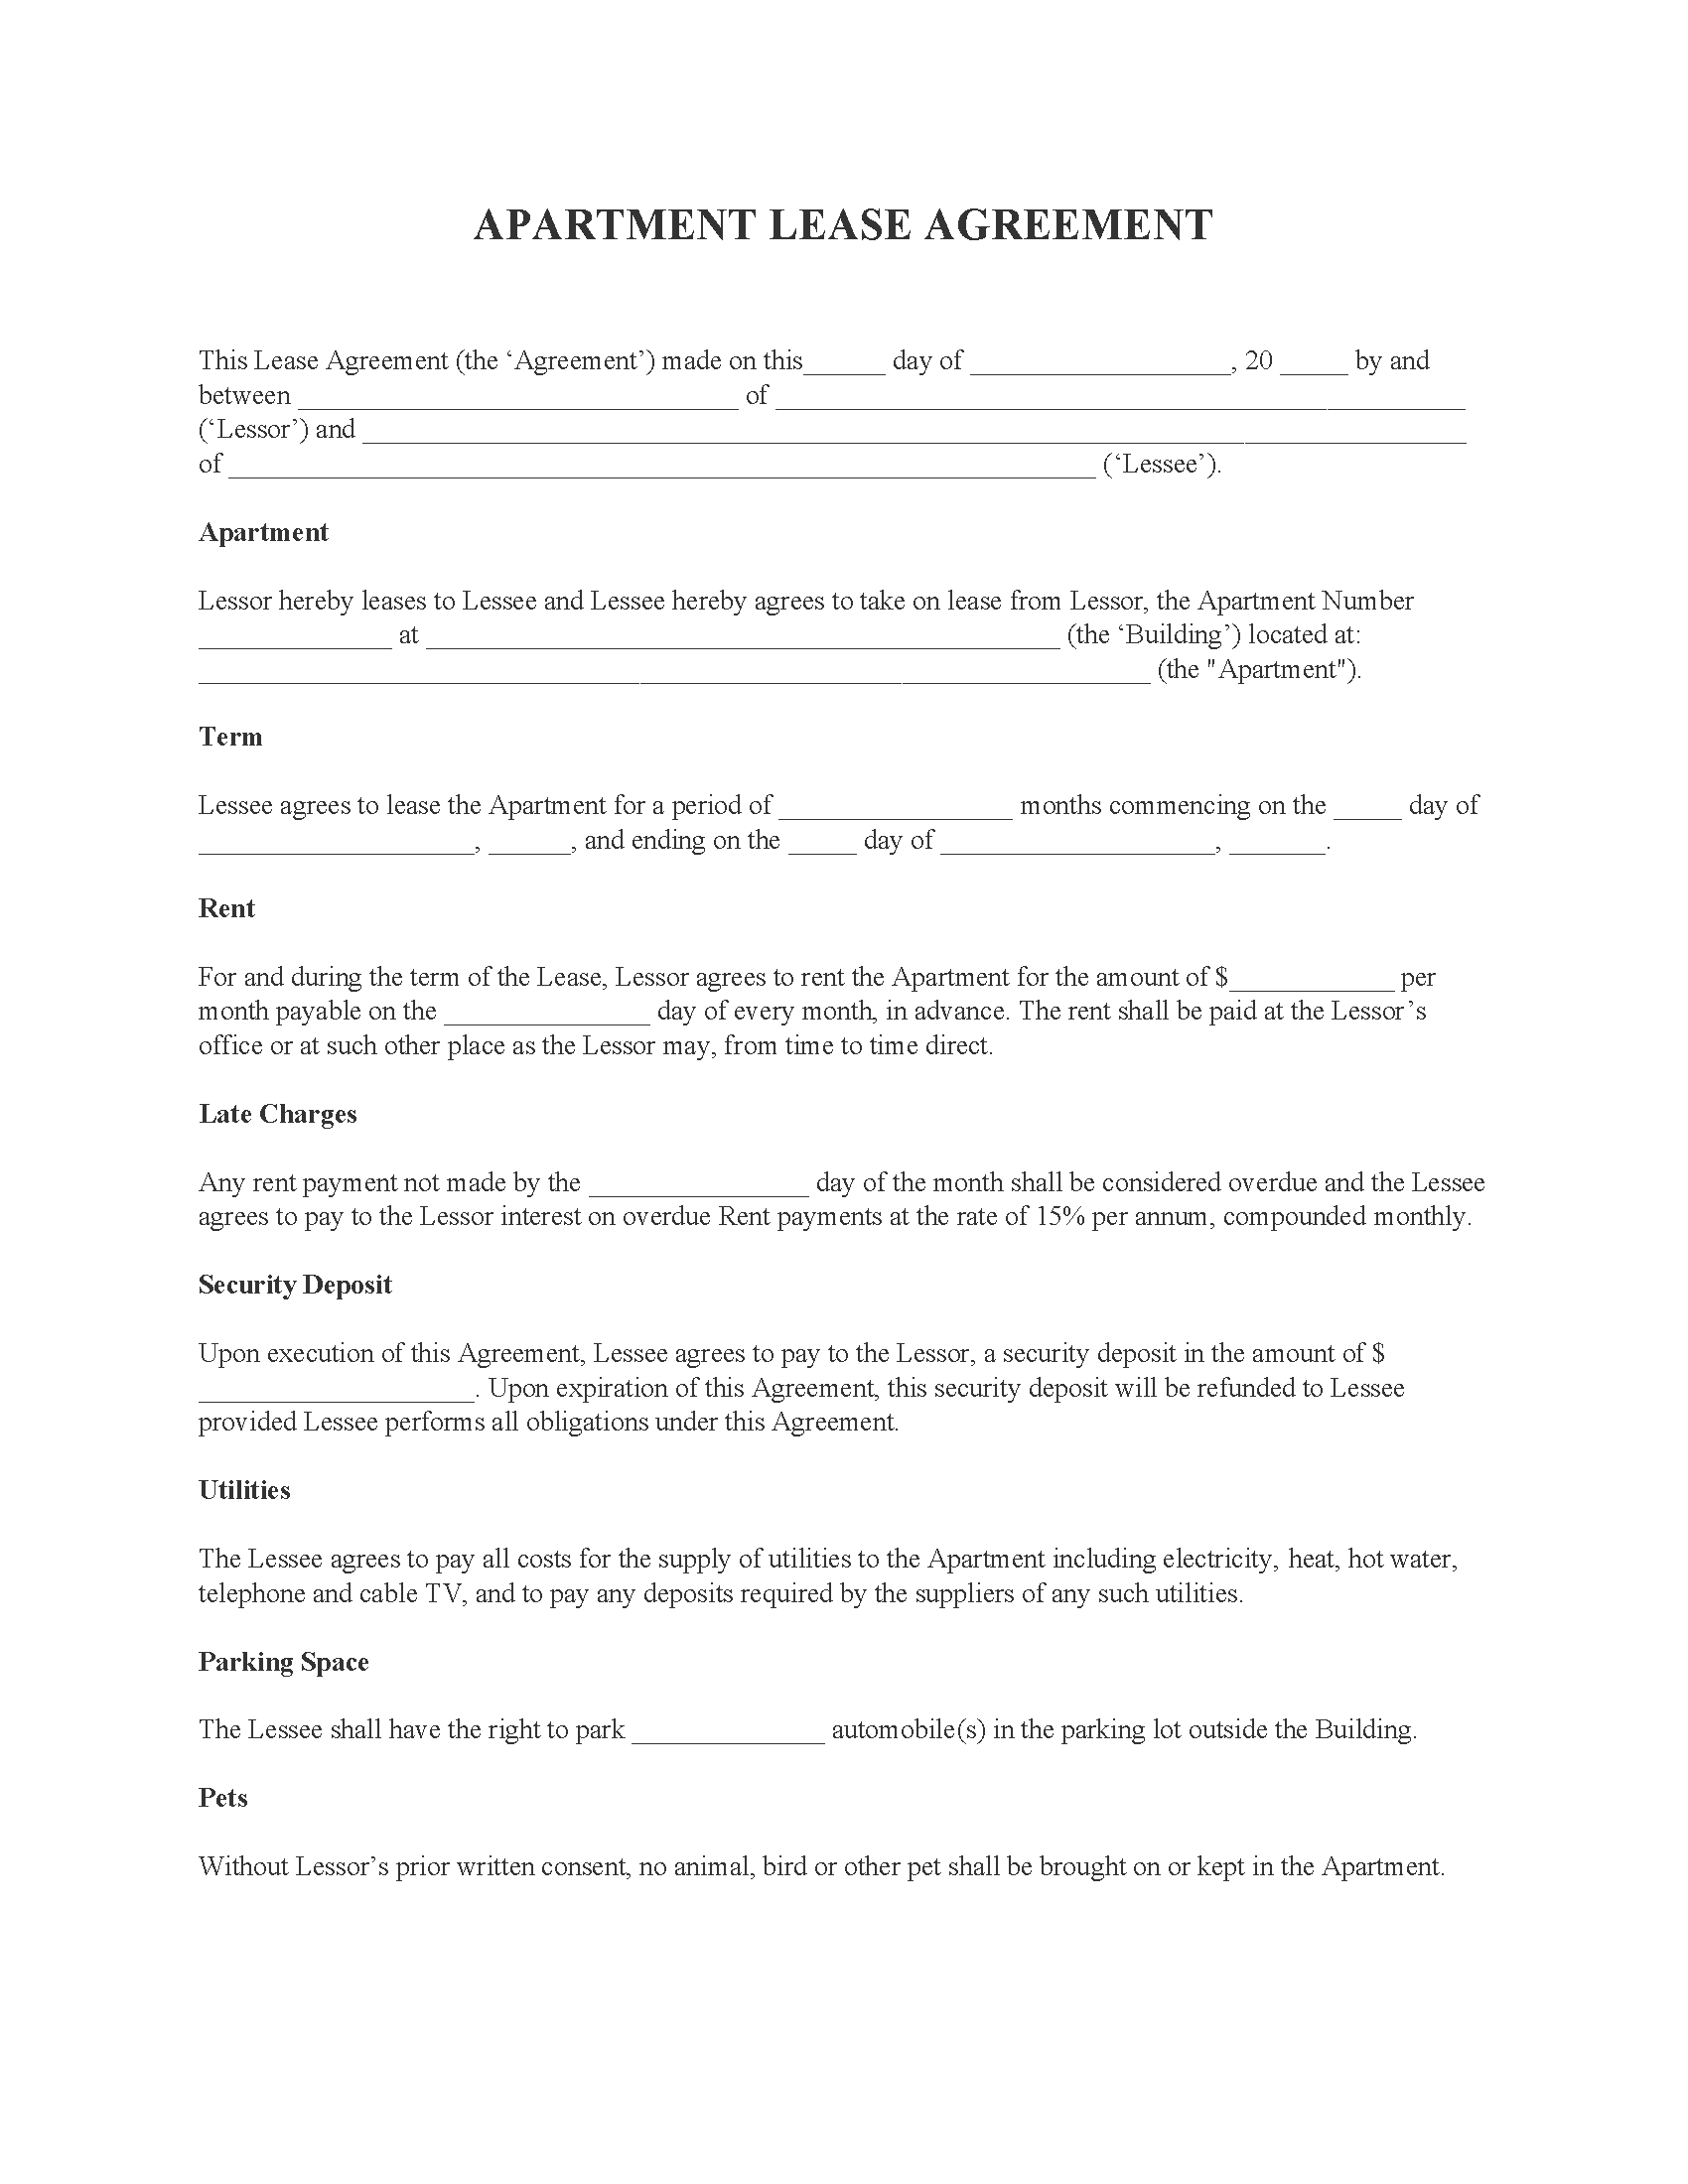 free-new-york-standard-apartment-lease-agreement-form-pdf-word-eforms